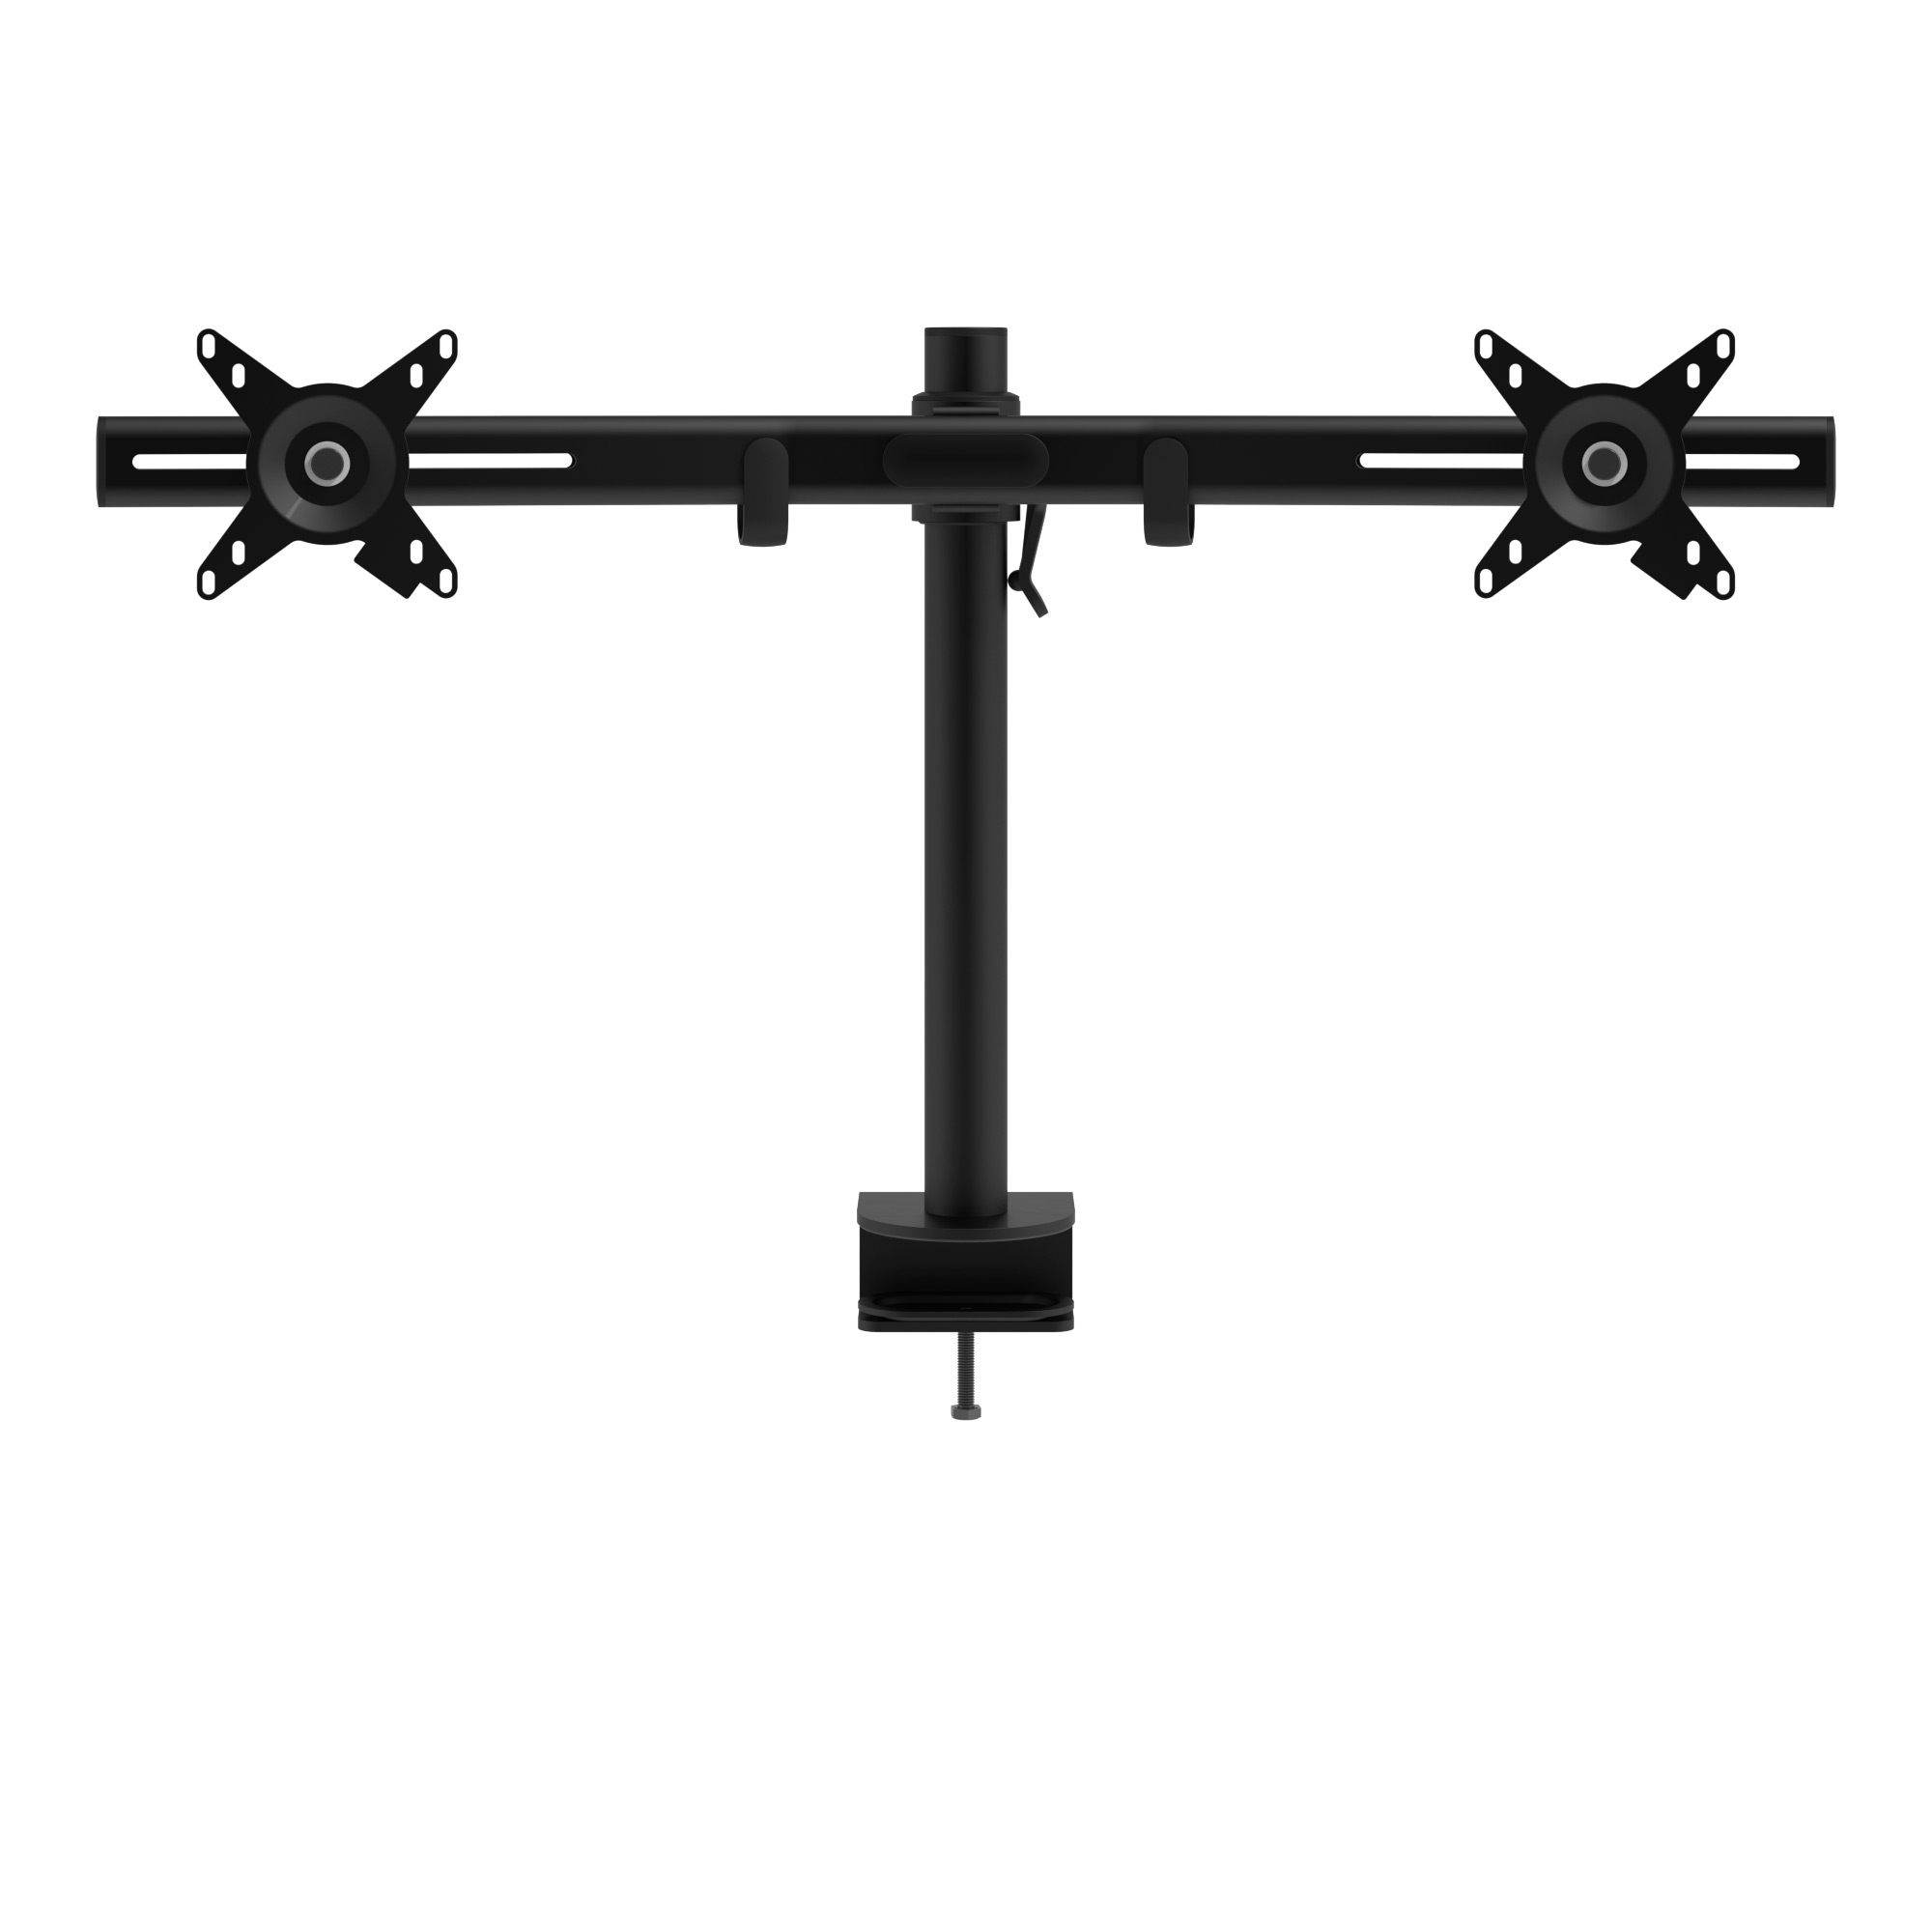 52.643 Dataflex Viewmate dual monitor arm - black - desk clamp and bolt through mounts - fixed depth